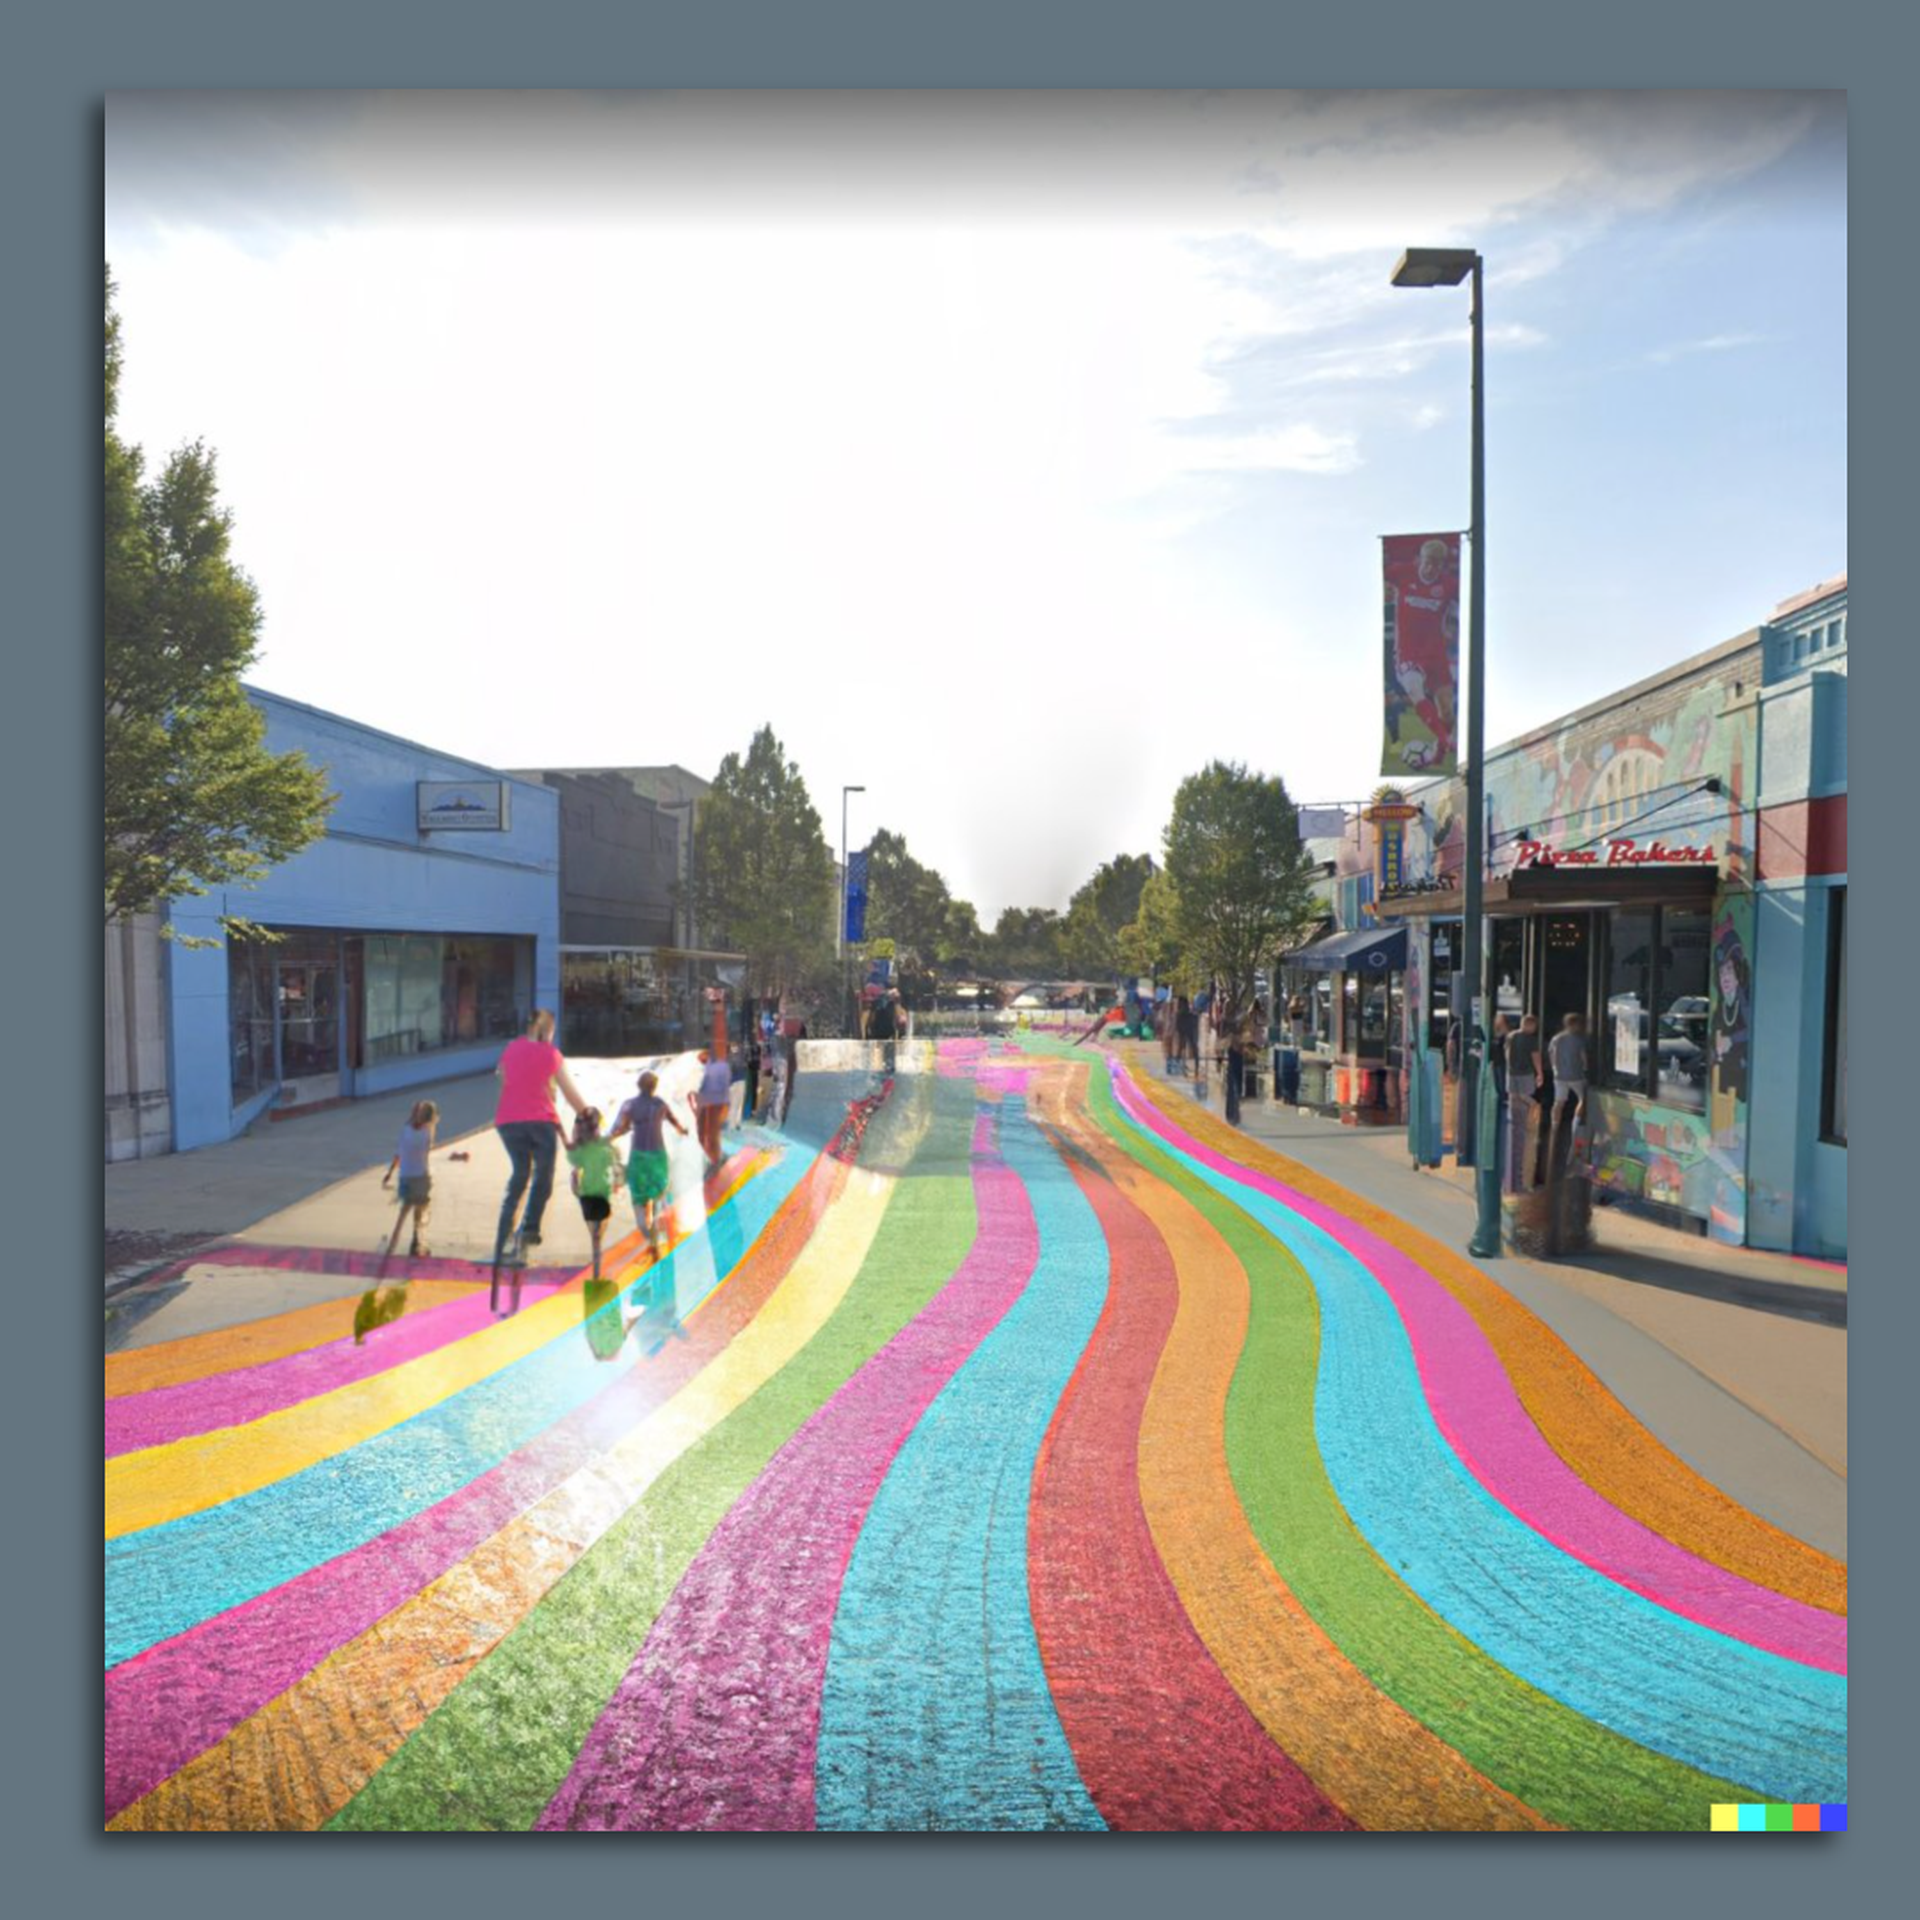 Carytown with no cars and a rainbow painted in the middle of the street